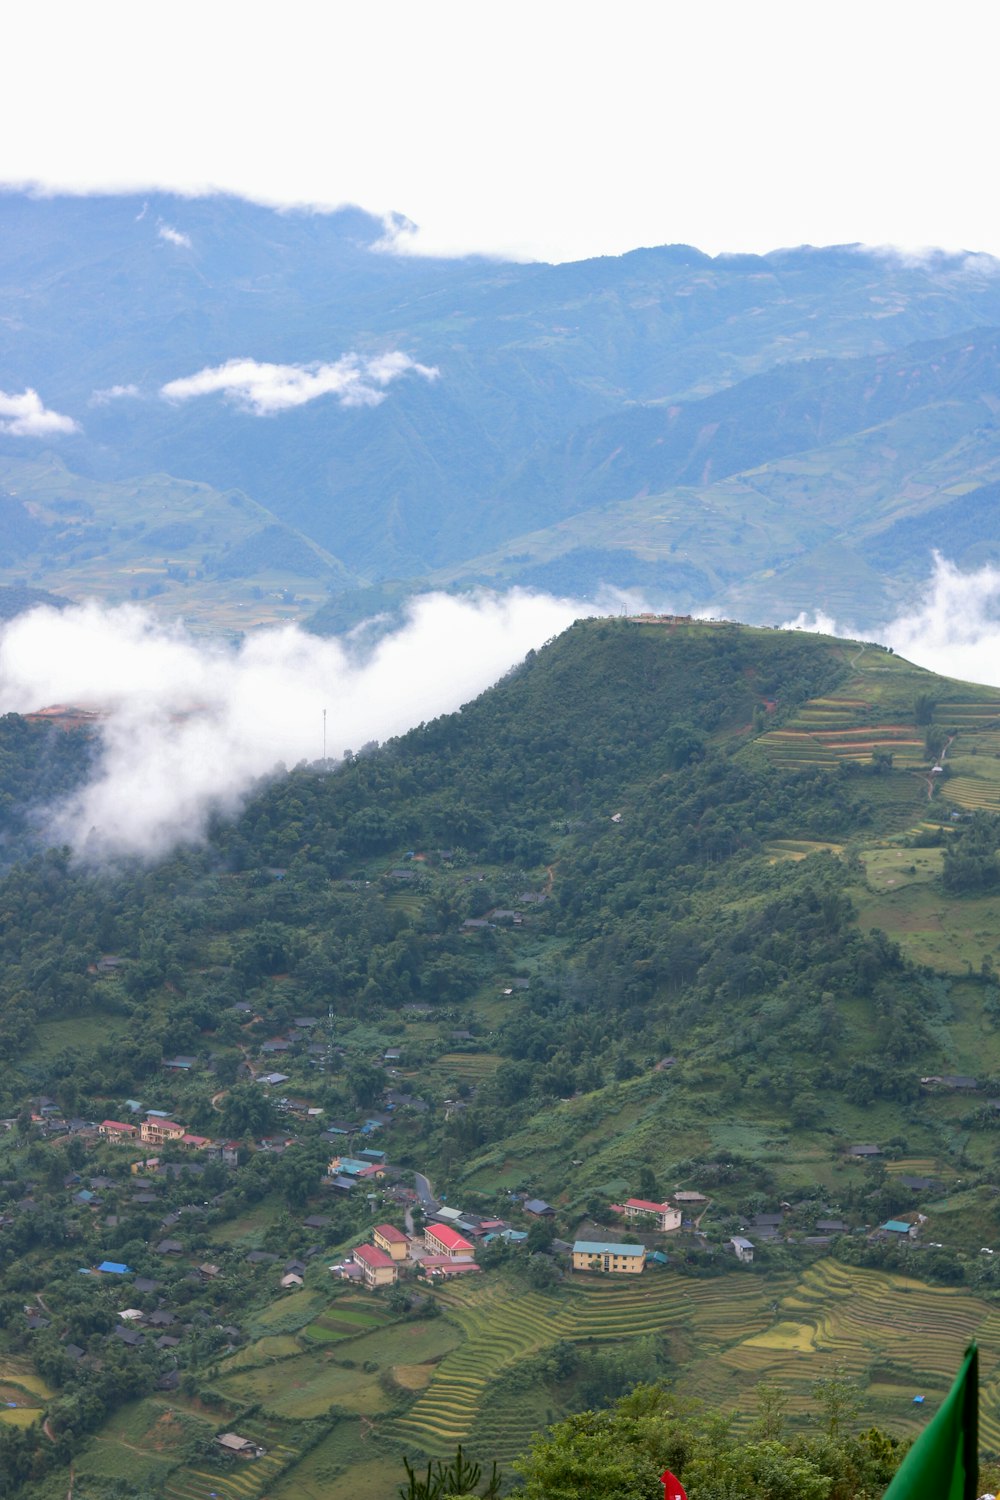 a view of a mountain with a village below